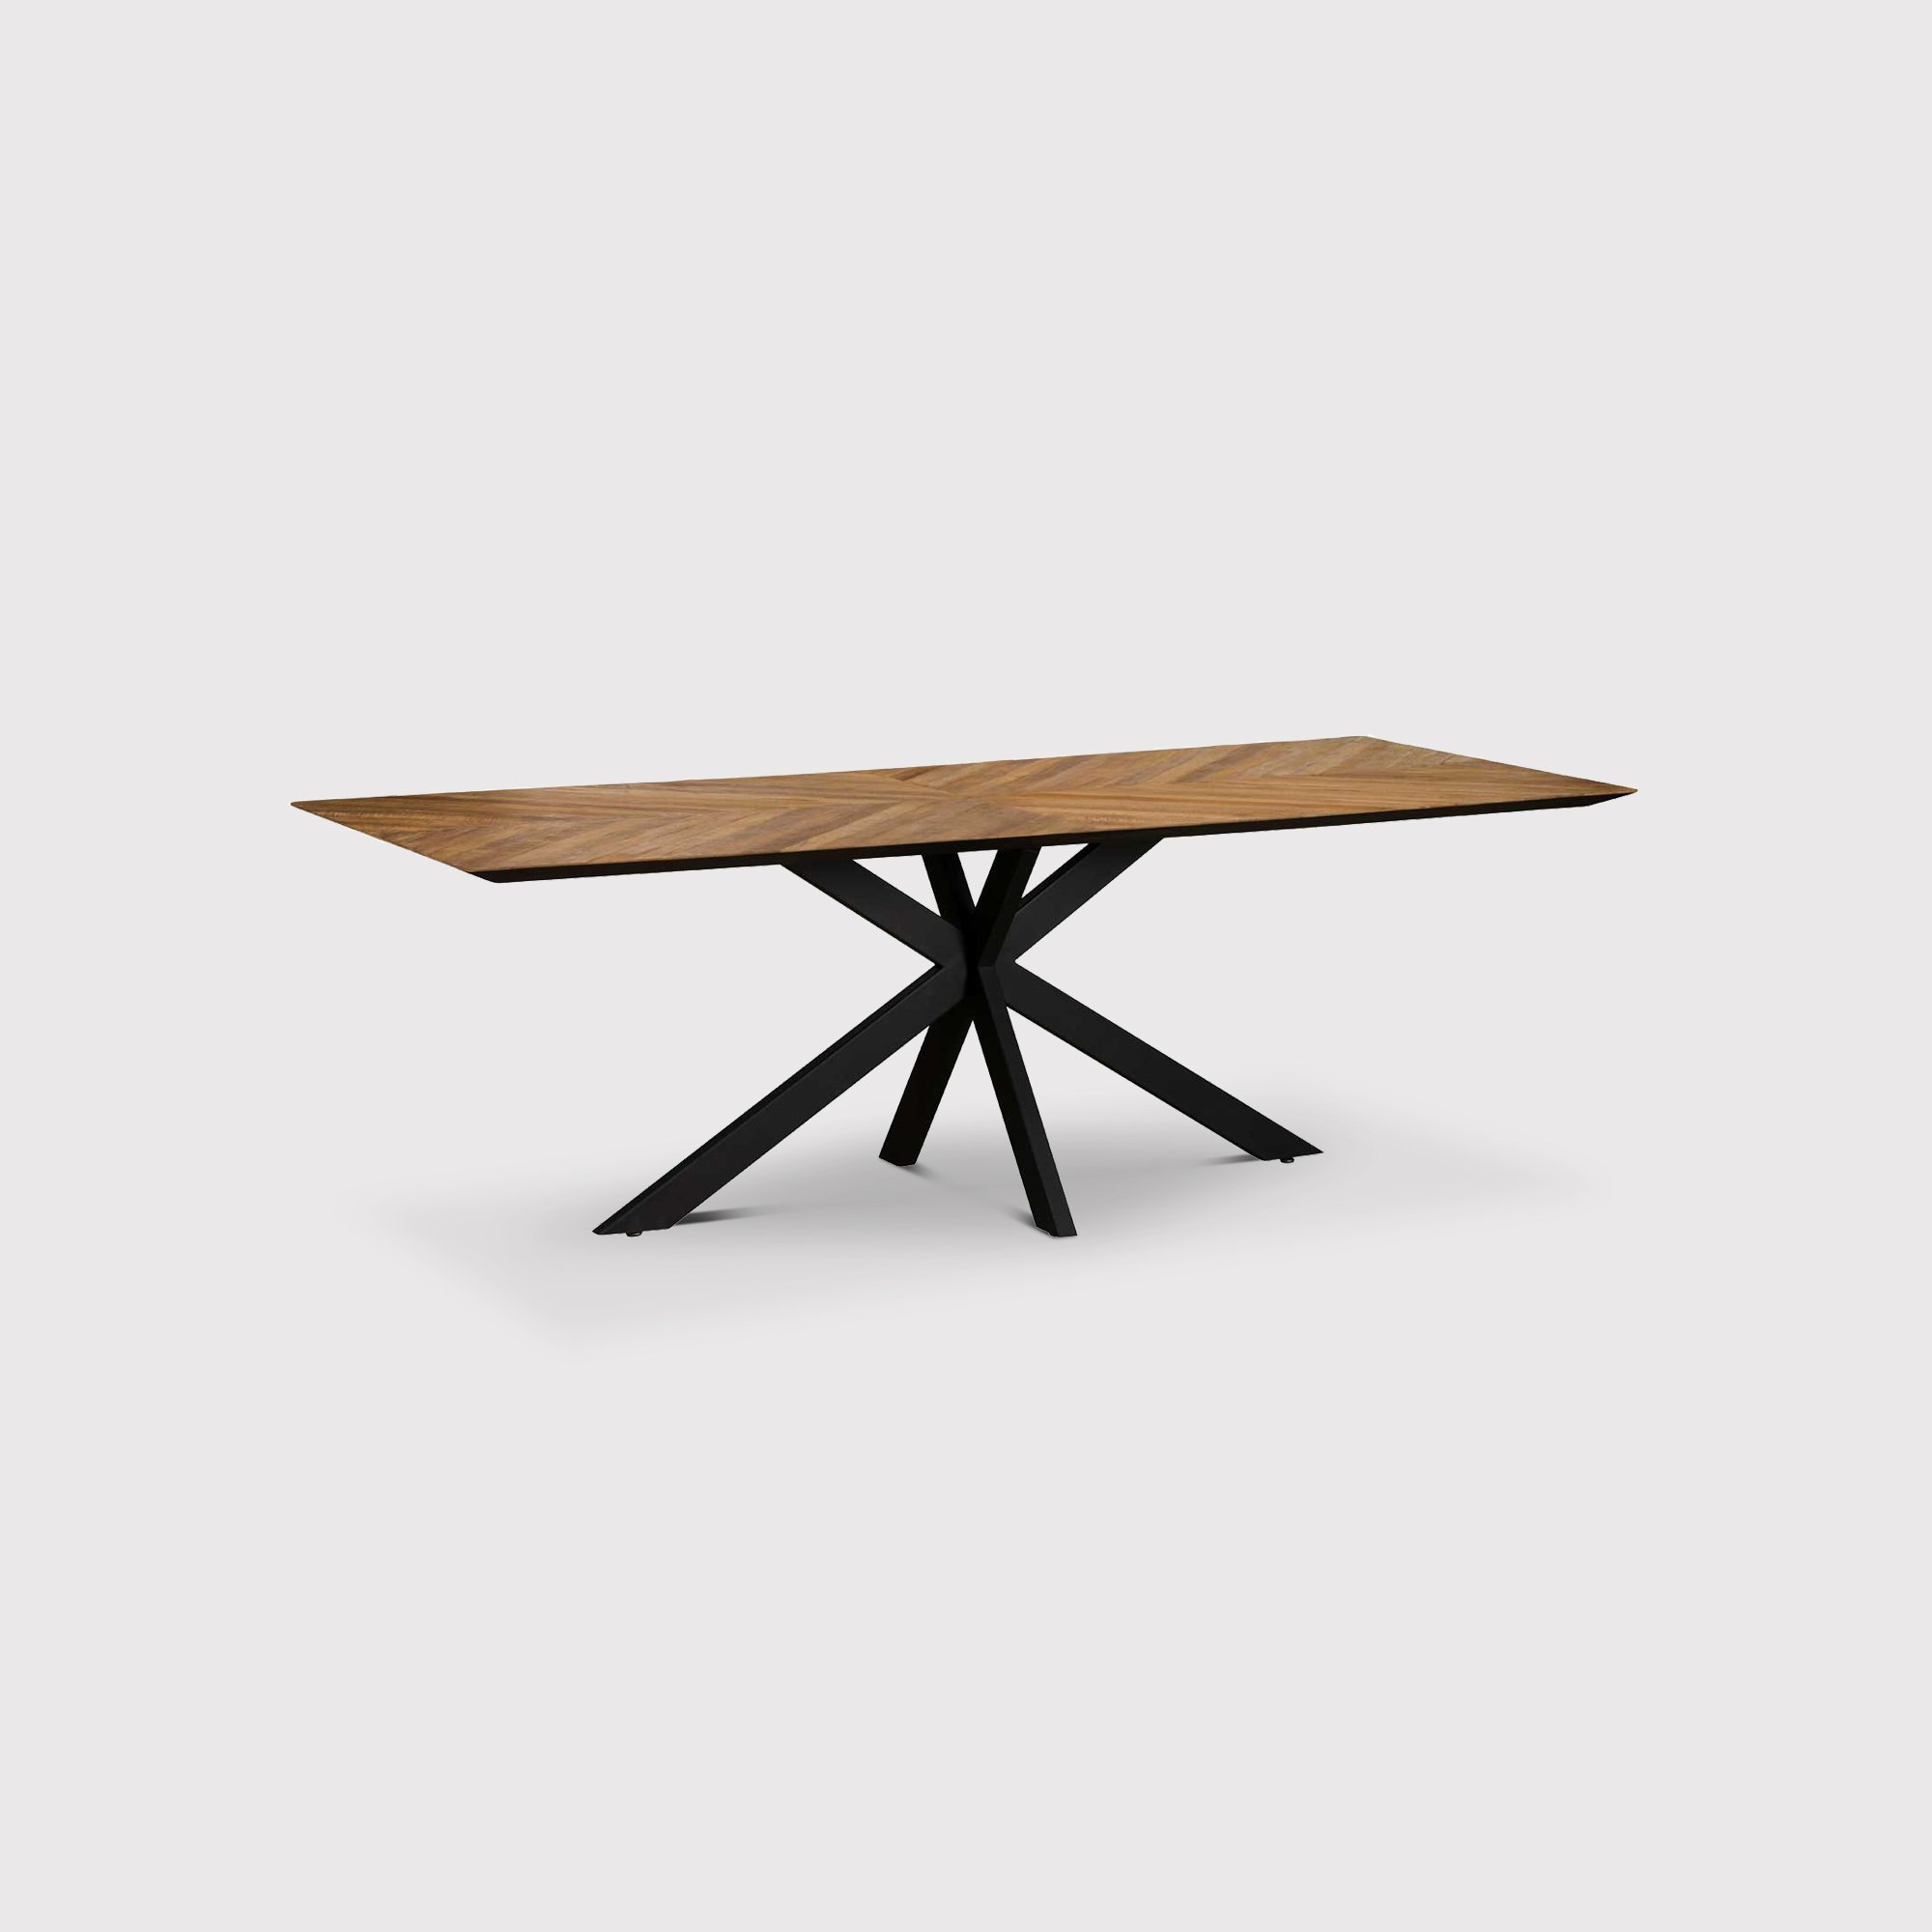 Brixton 240cm Dining Table, Brown | Barker & Stonehouse